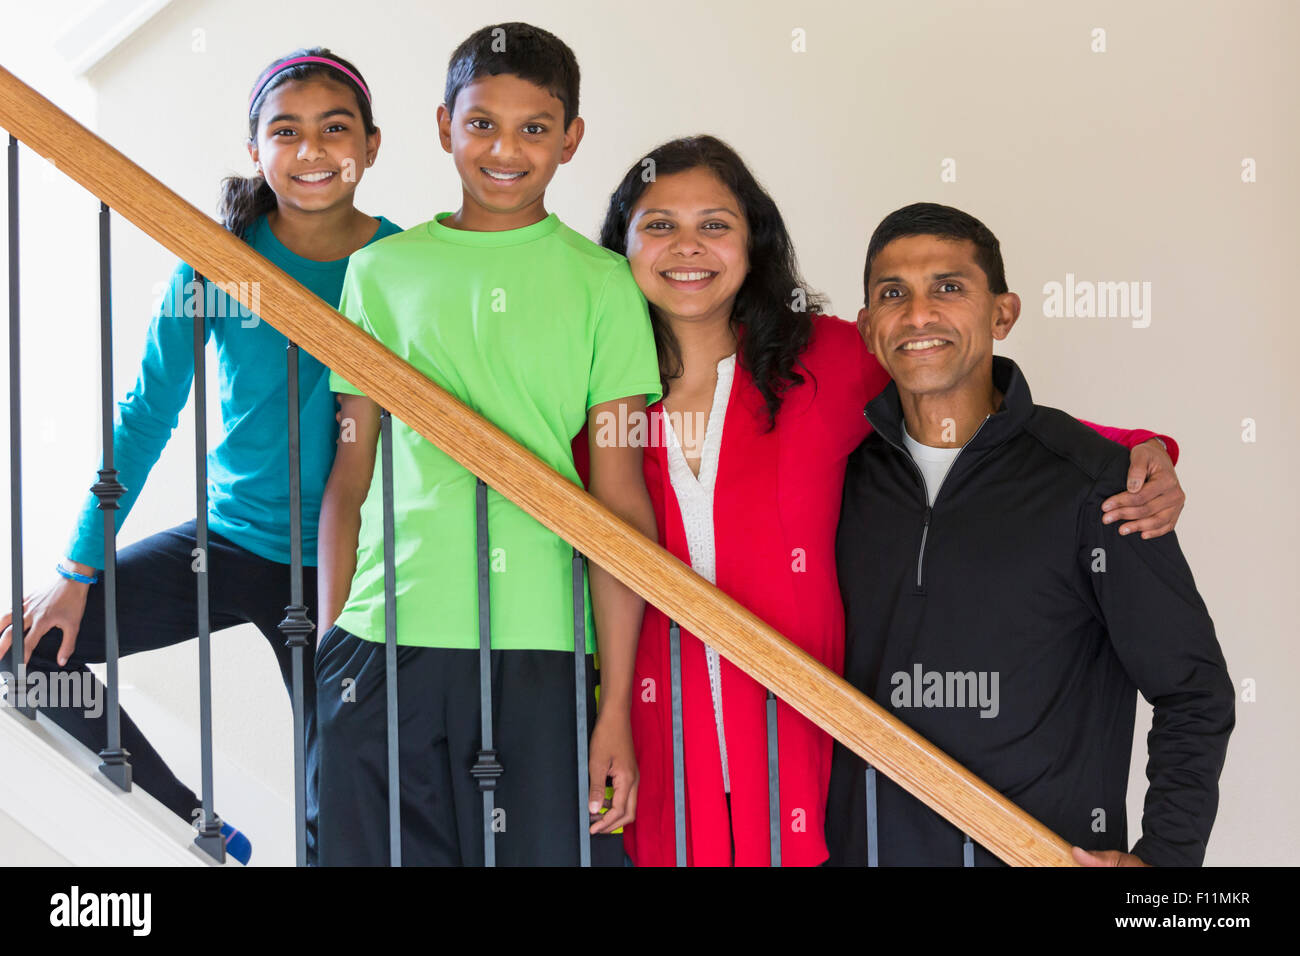 Close up of Indian family smiling on staircase Banque D'Images